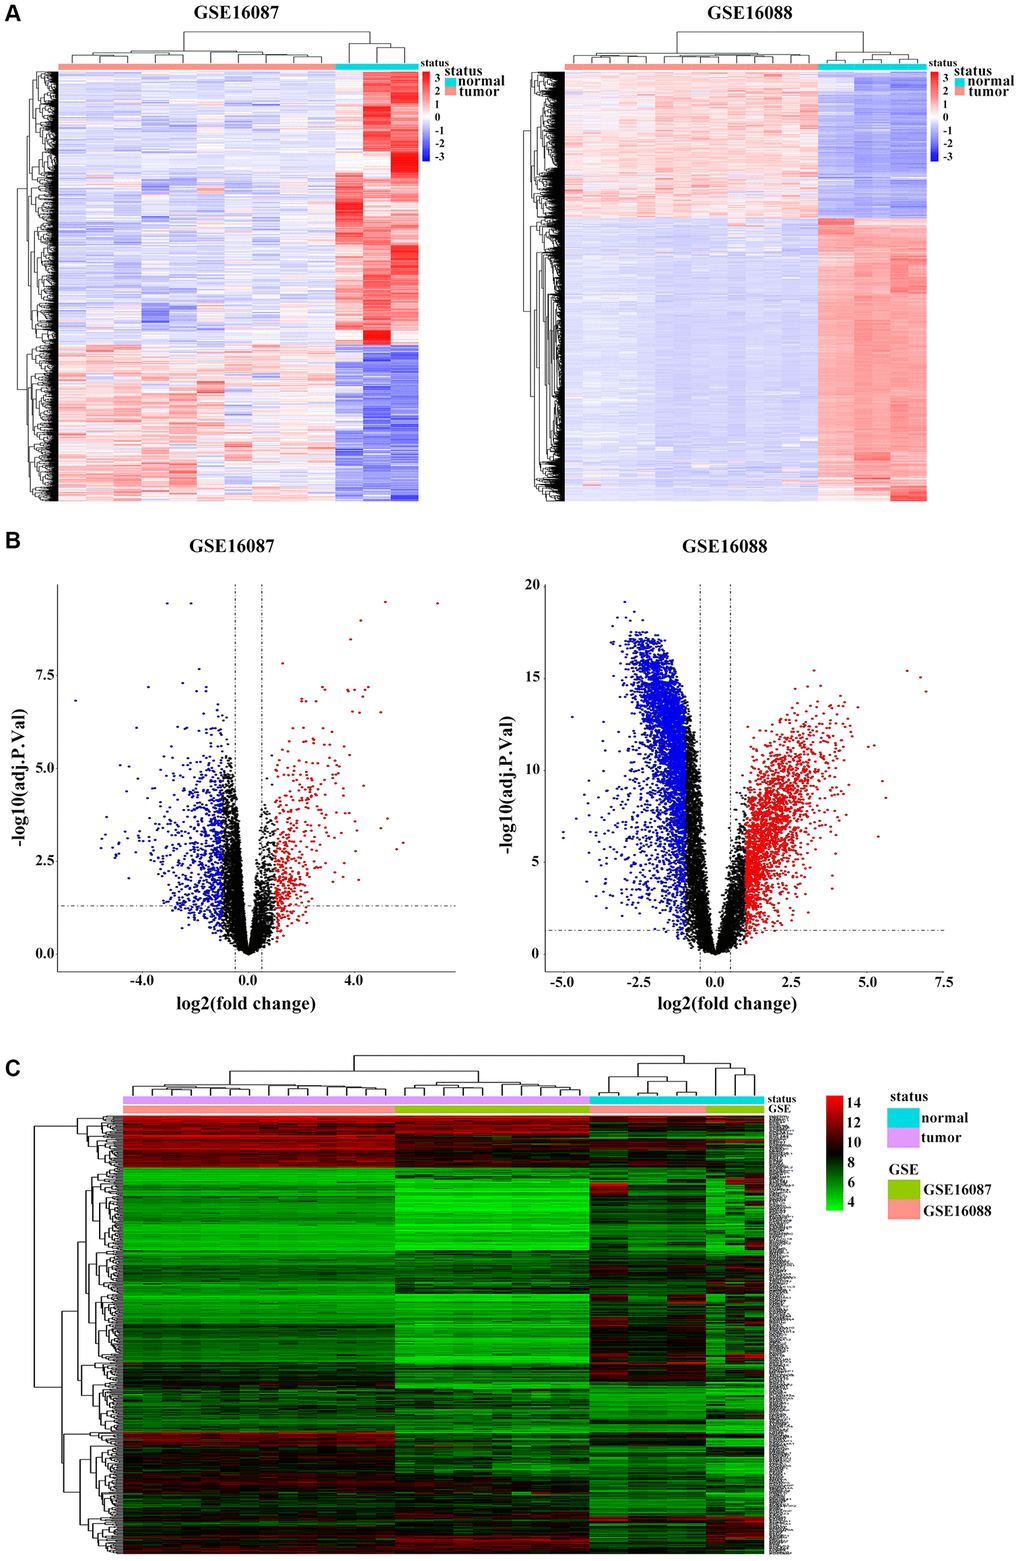 Identification of DEGs in OS. (A) Heatmap shows differential expression profiles in normal tissues and tumor tissues from the GSE16087 and GSE16088 datasets. DEGs were defined with |log2FC| > 1 and adjusted P-value B) Genome-wide gene expression profiles of OS tumor and normal tissues from two GSE datasets were shown with volcano plots. Black symbols represent normally expressed genes. Red and blue symbols represent the aberrantly expressed genes with |log2FC| > 1 and adjusted P-value C) Hierarchical clustering analysis of differential expression profiles of 515 common DEGs in OS tumor and normal tissues from the two GSE datasets. Blue and red blockages respectively indicate the expression level of genes lower or higher than the median expression value across all samples.